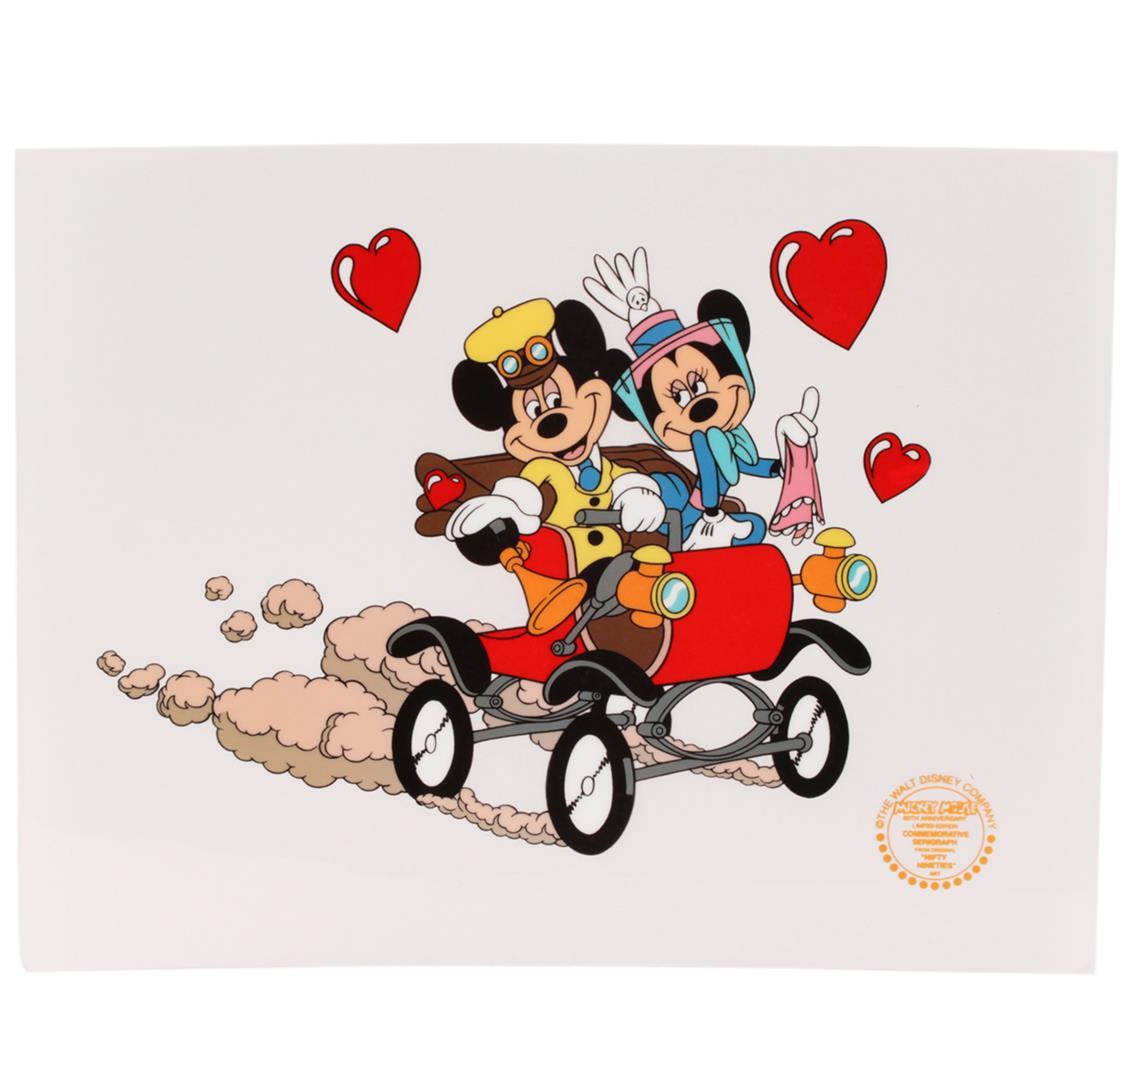 Nifty Nineties by The Walt Disney Company Limited Edition Serigraph